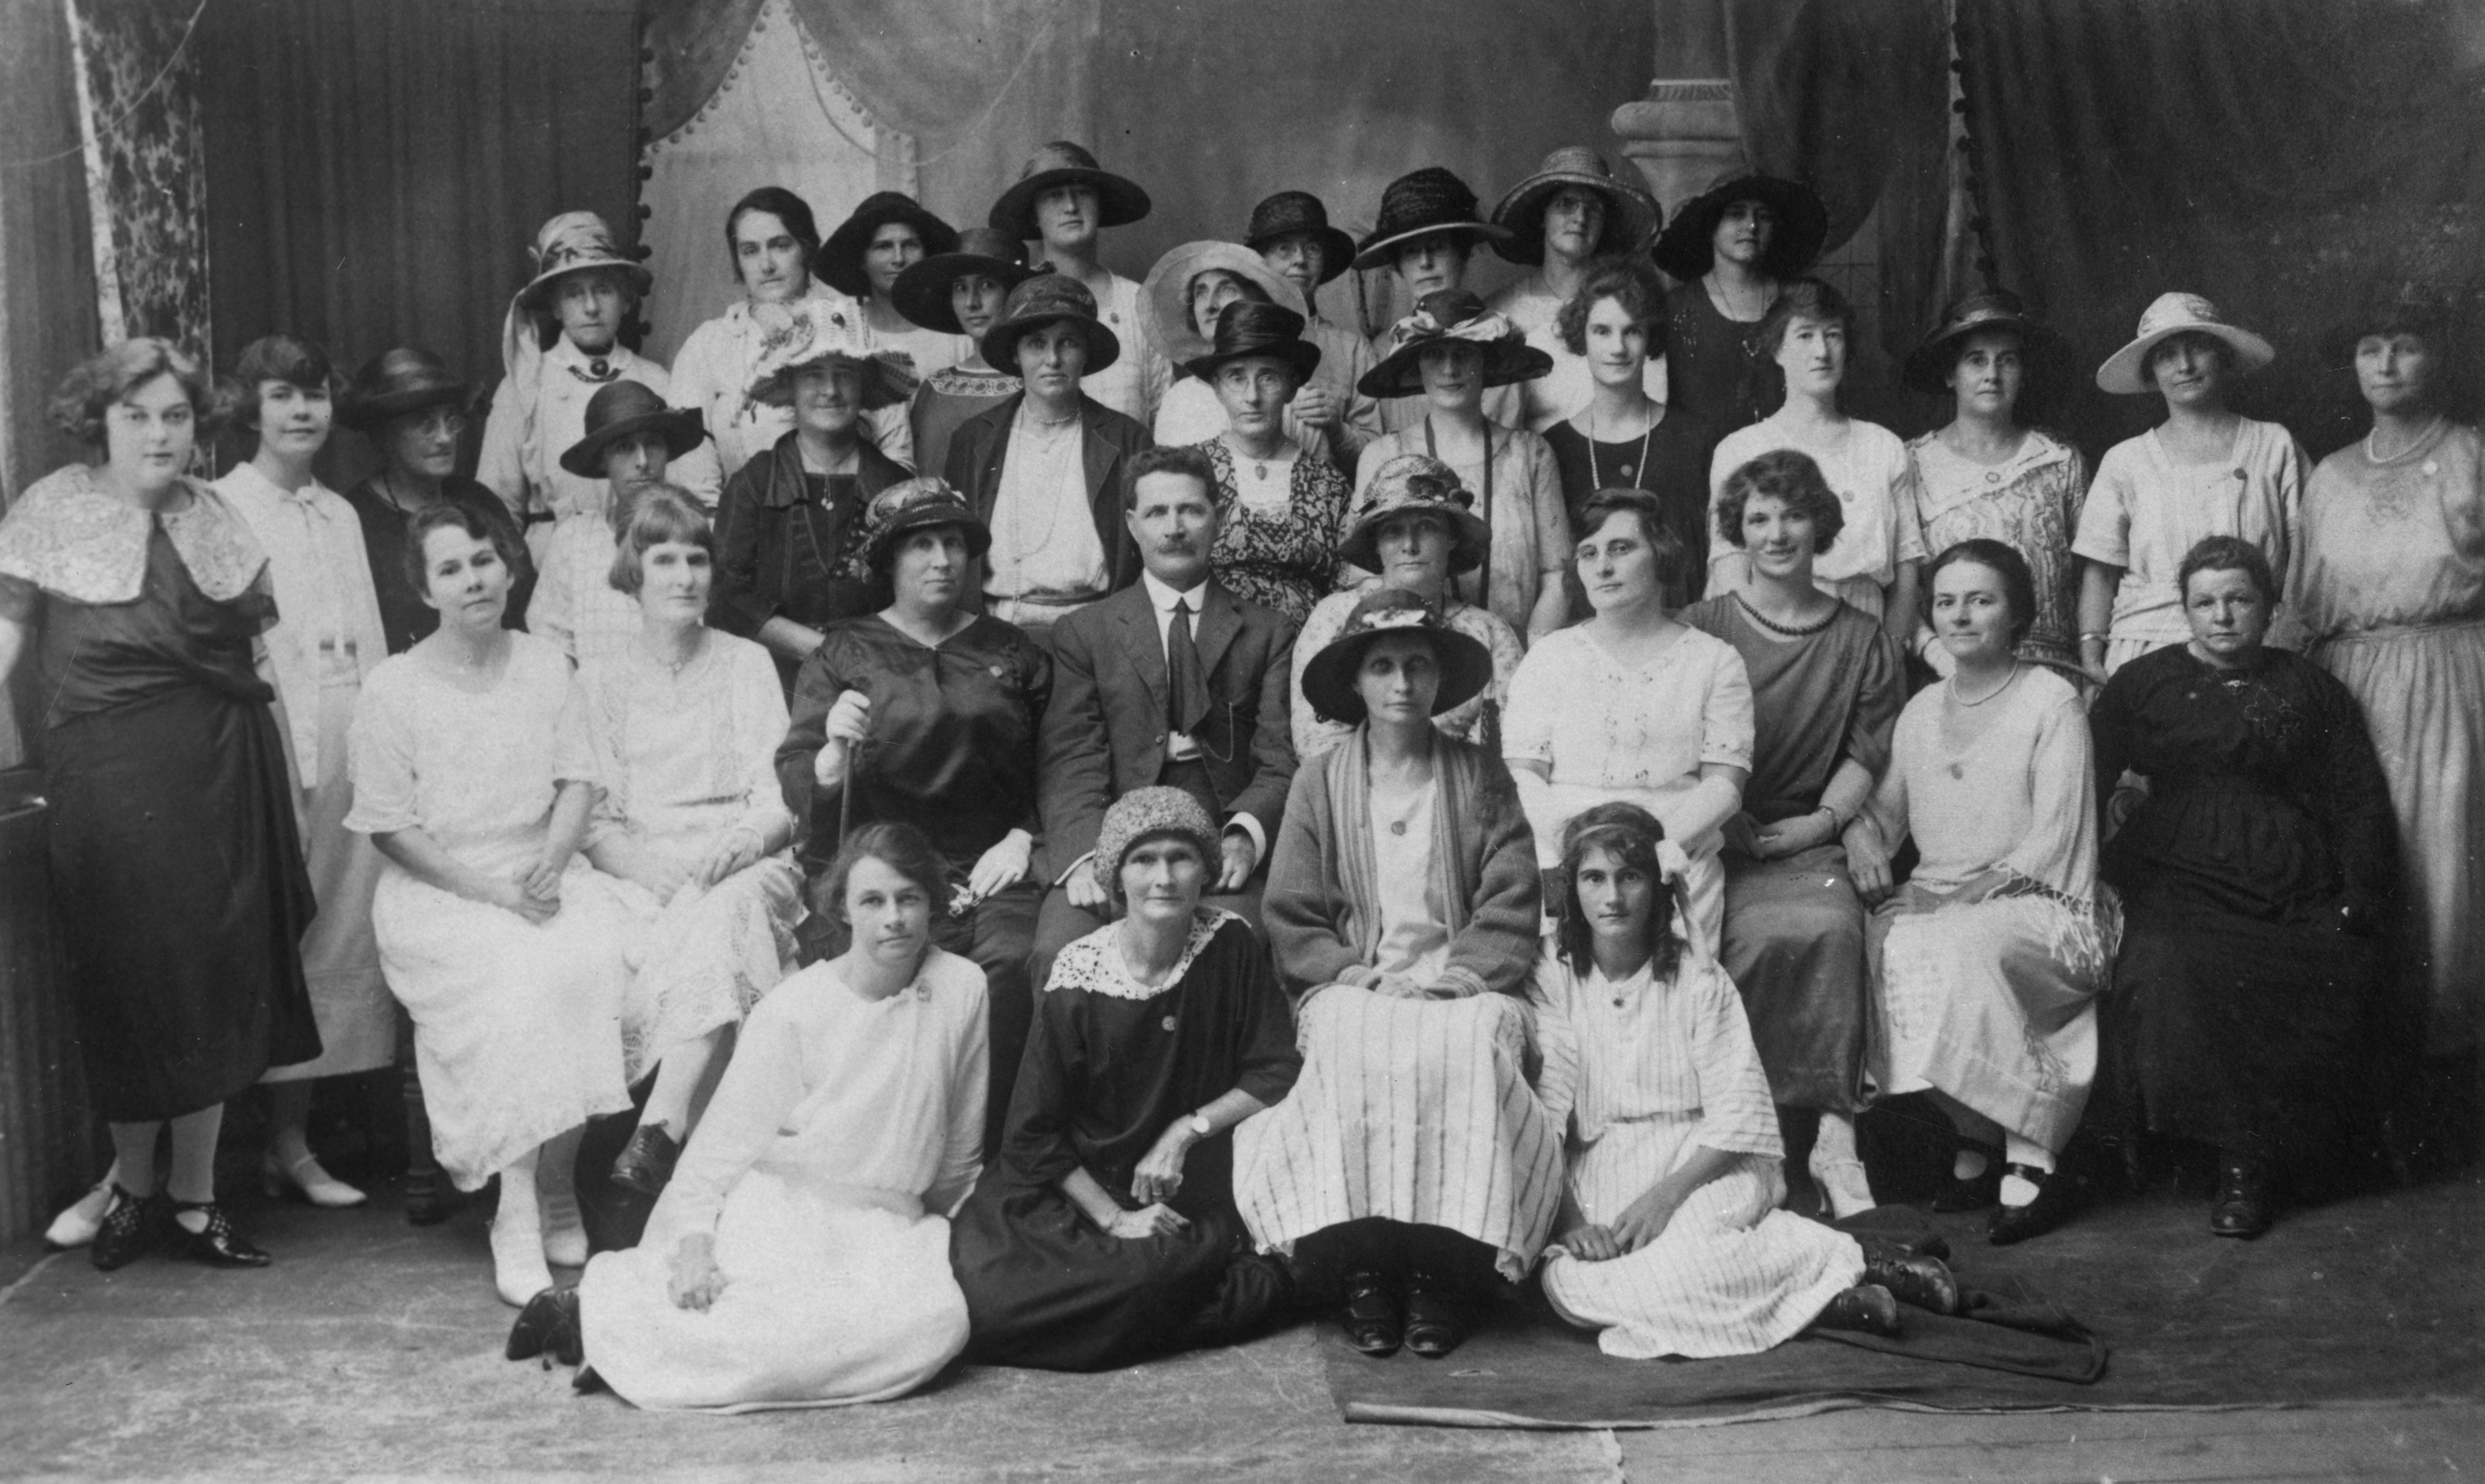 Portrait of the members at the inaugural meeting of the Country Women's Association in Bowen, 1923